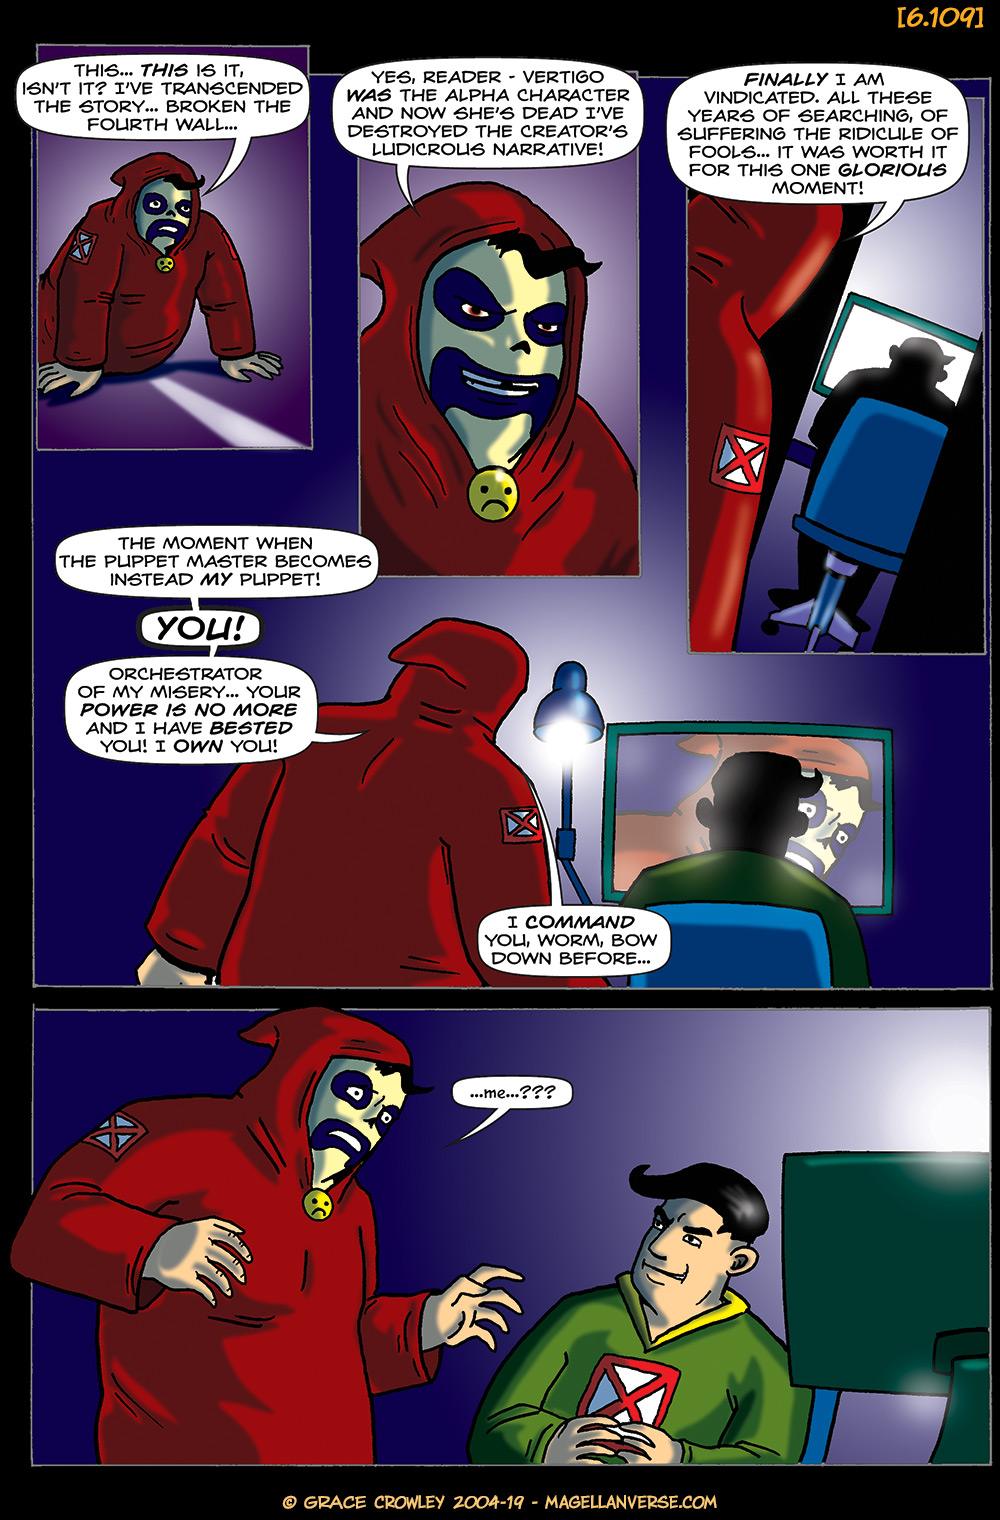 Page 6.109